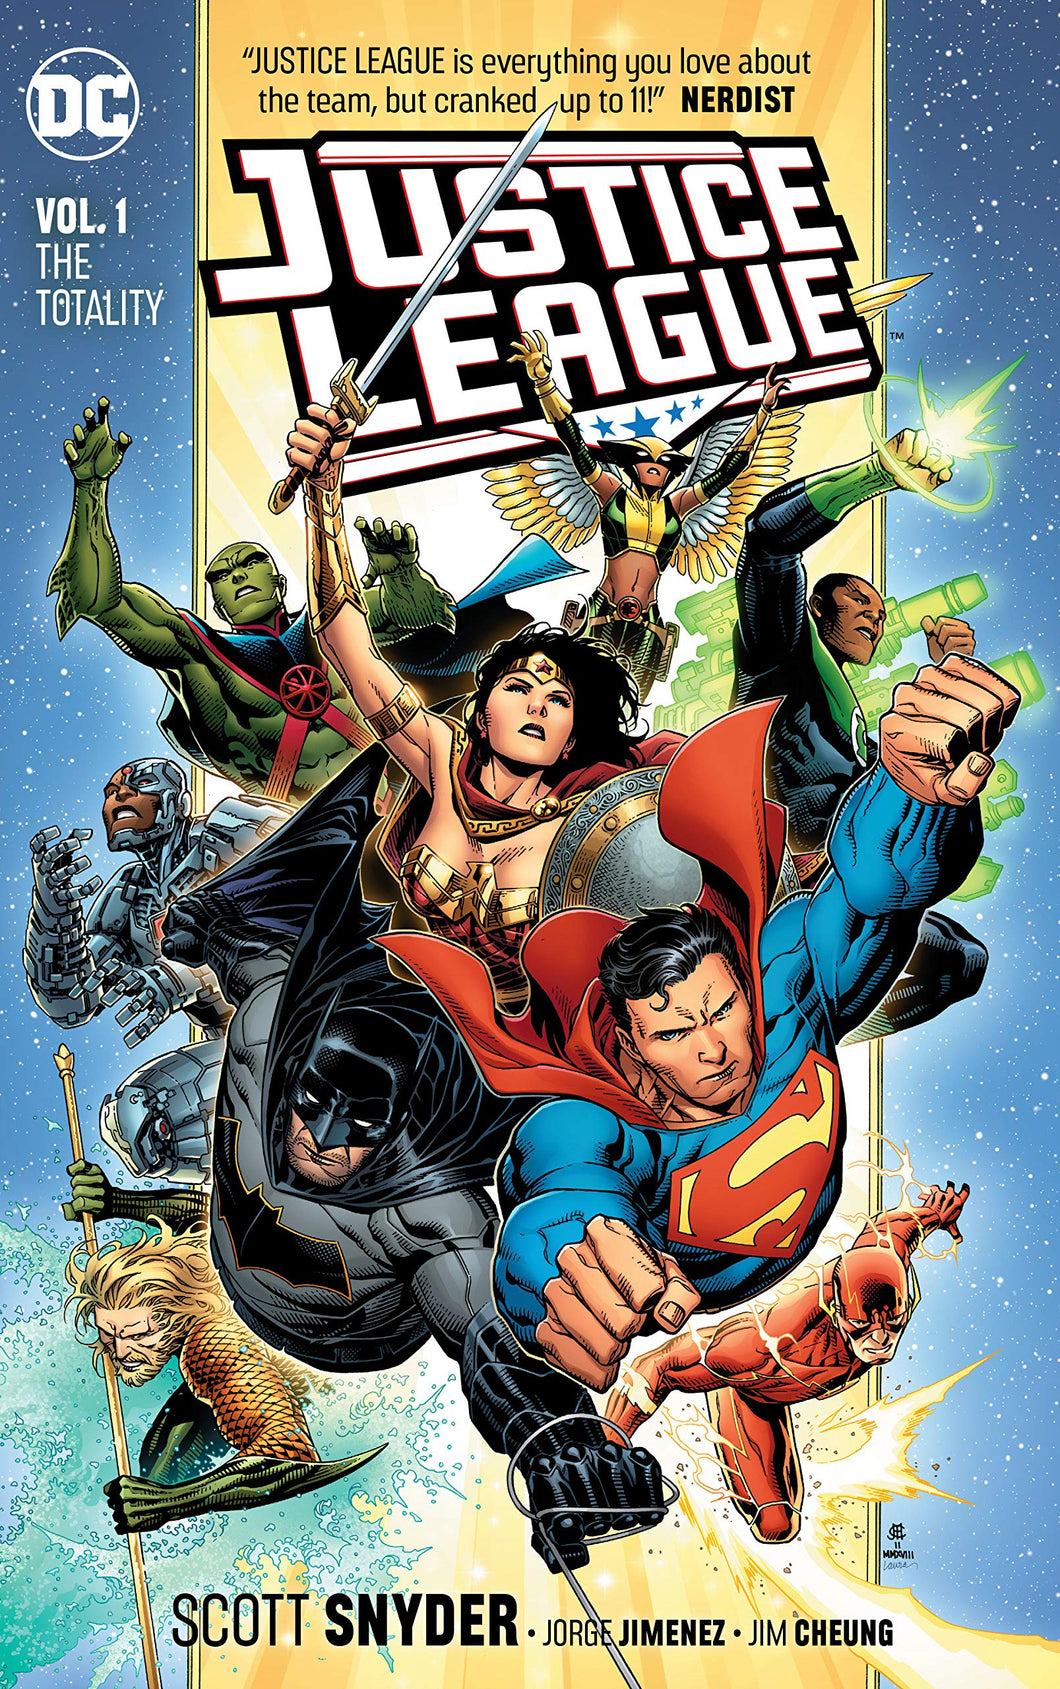 Justice League Vol. 1 : The Totality